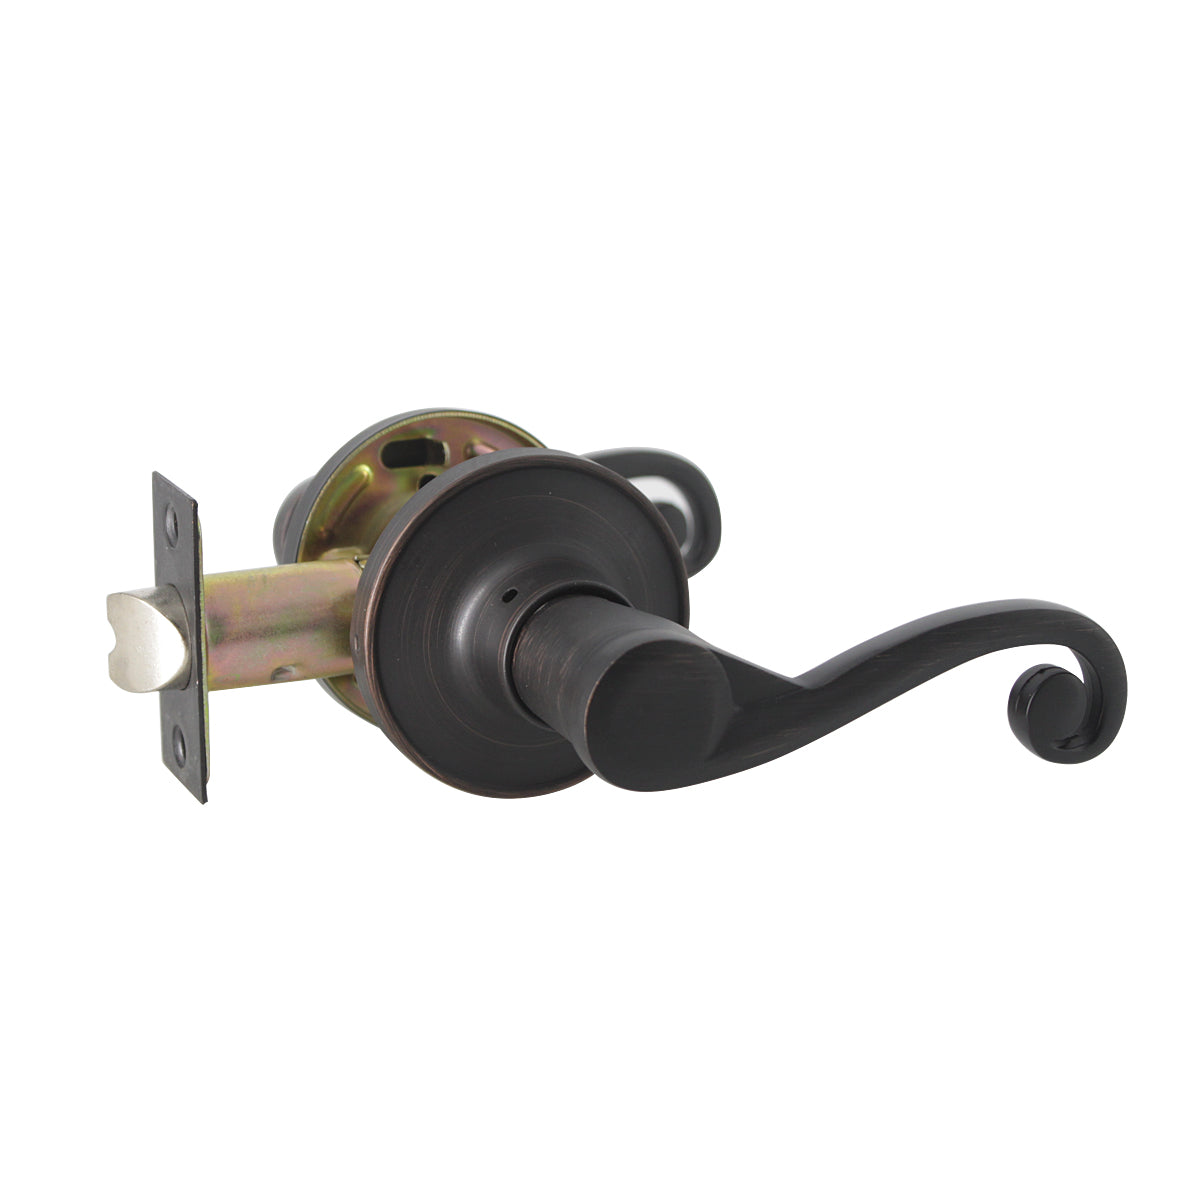 Scroll Wave Style Door Levers Oil Rubbed Bronze Finish Privacy/Passage Function Door Lock - DL851AORB